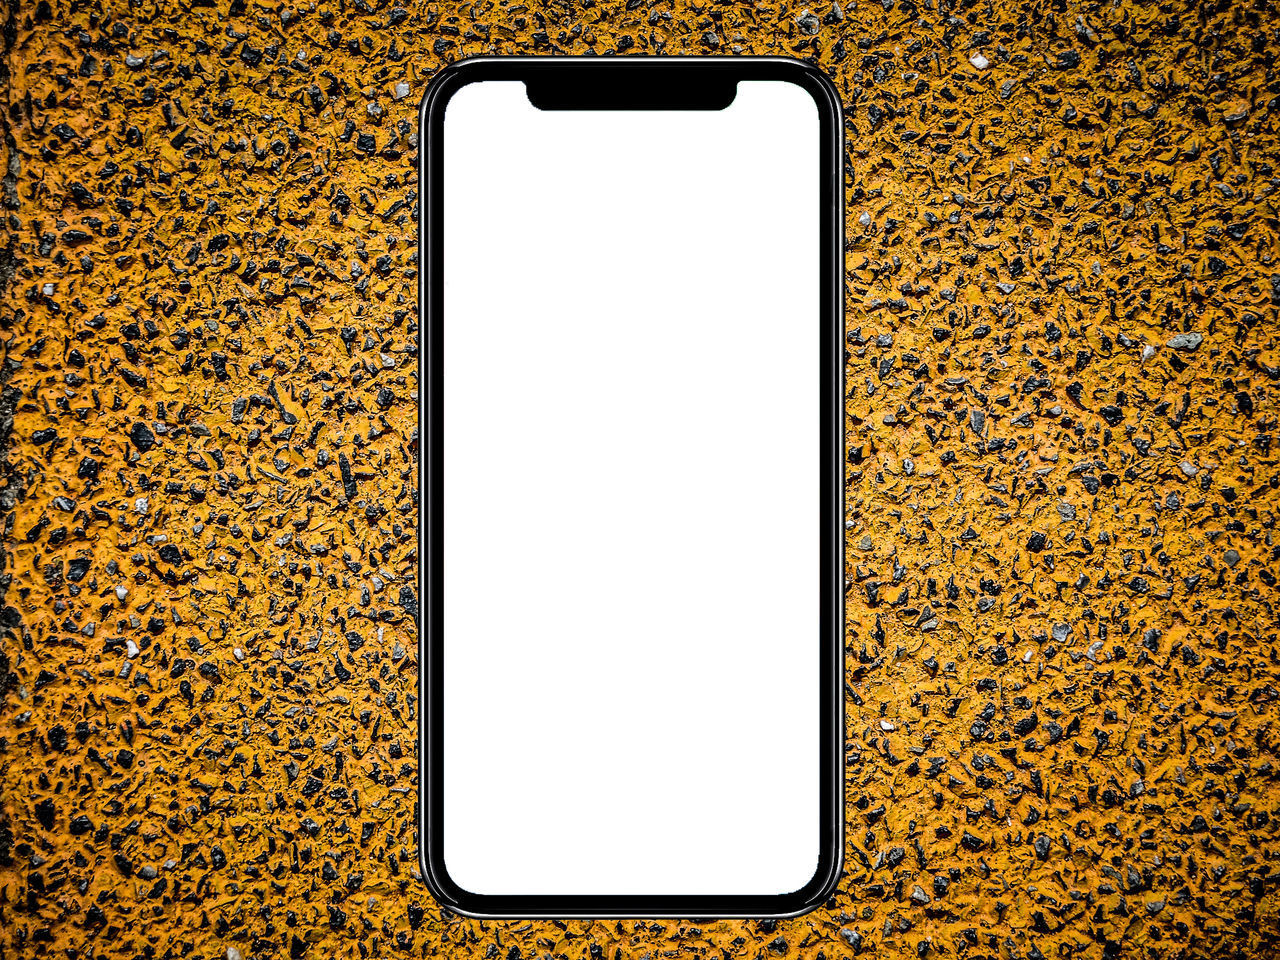 DIRECTLY ABOVE VIEW OF SMART PHONE ON YELLOW BACKGROUND